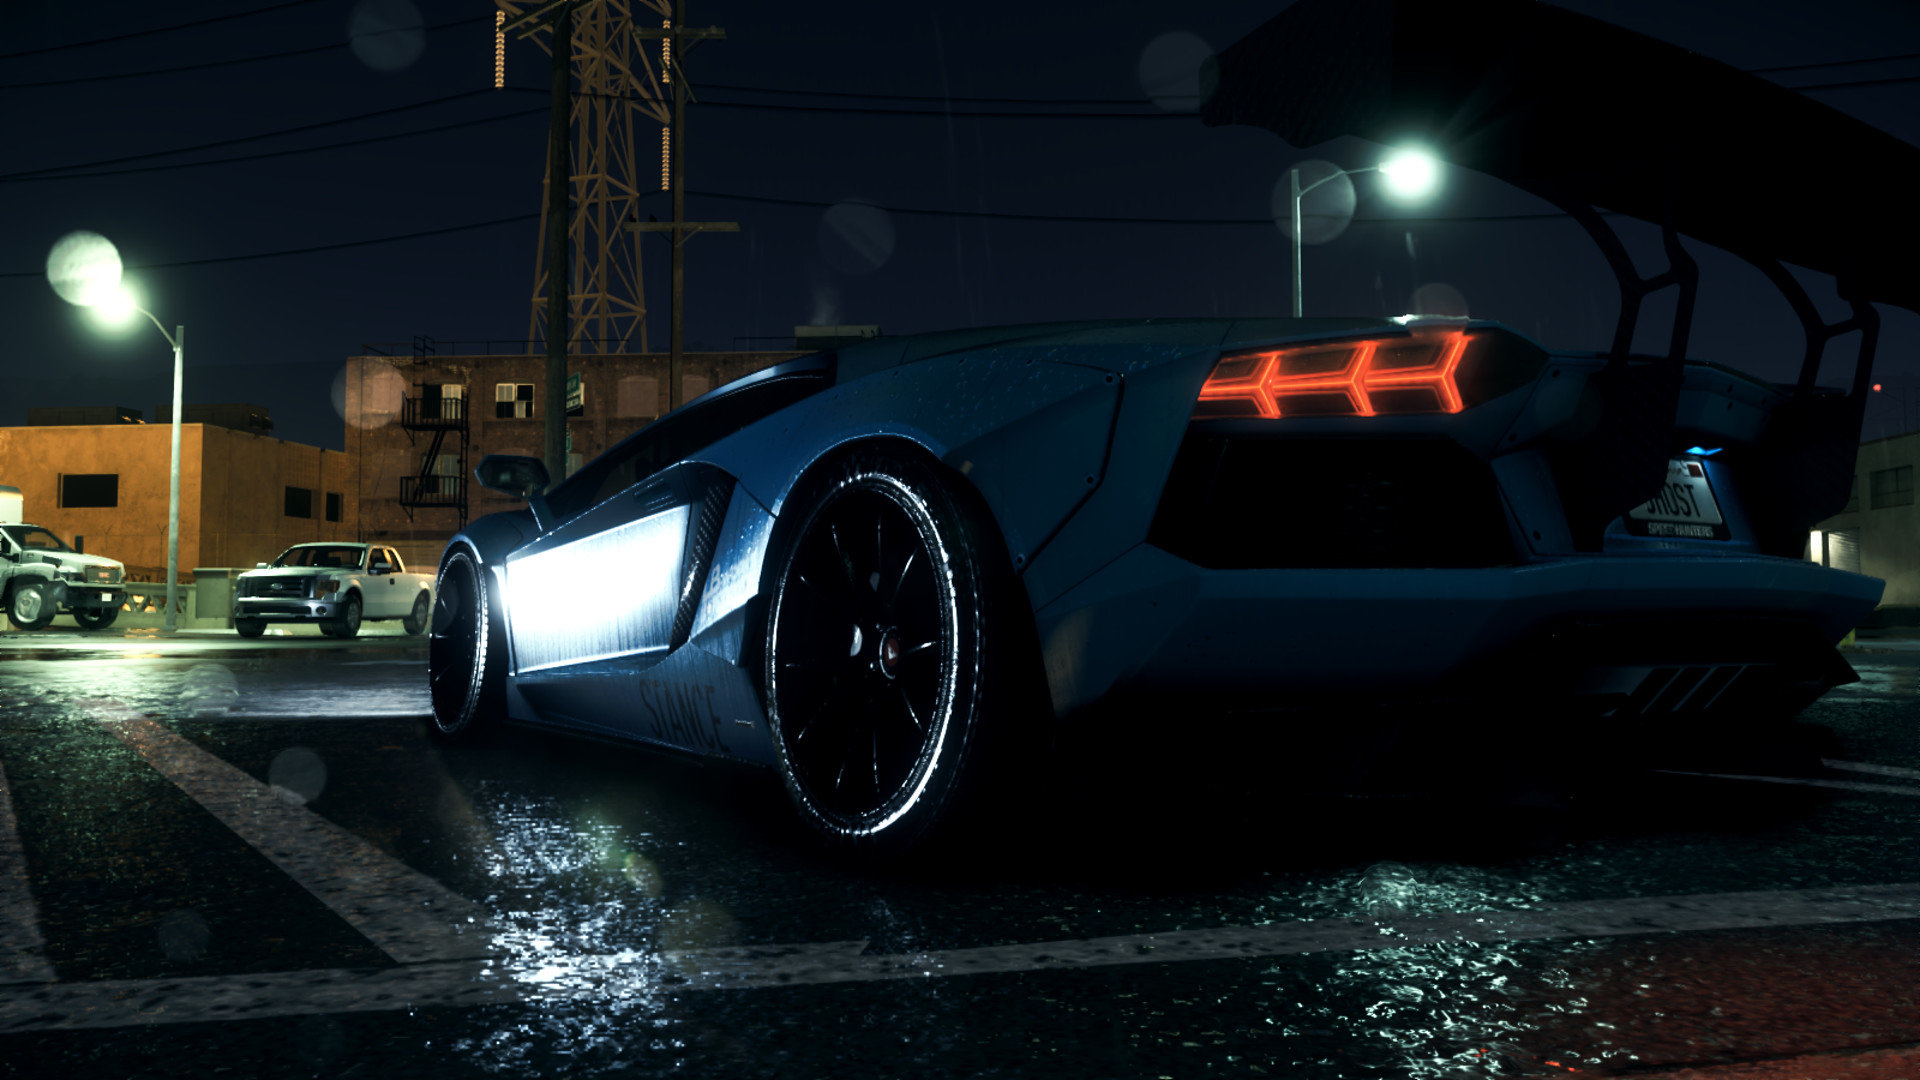 High resolution Need For Speed (NFS) full hd 1080p wallpaper ID:328357 for desktop